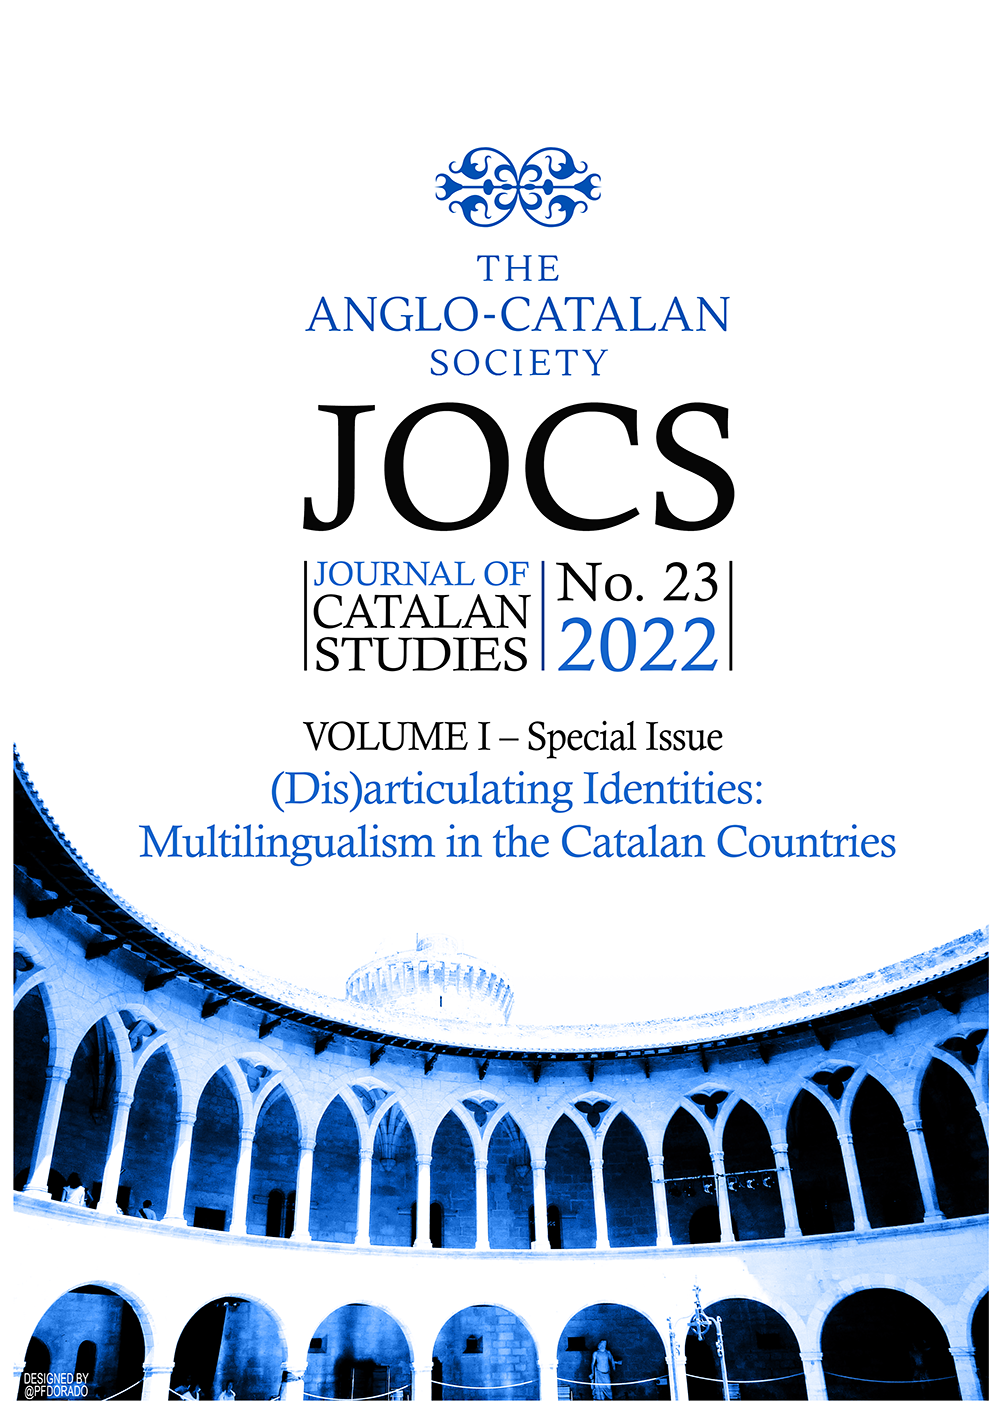 					View Vol. 1 No. 23 (2022): Special Issue – (Dis)Articulating Identities: Multilingualism in the Catalan Countries – Edited by Rhiannon McGlade and Brad Epps 
				